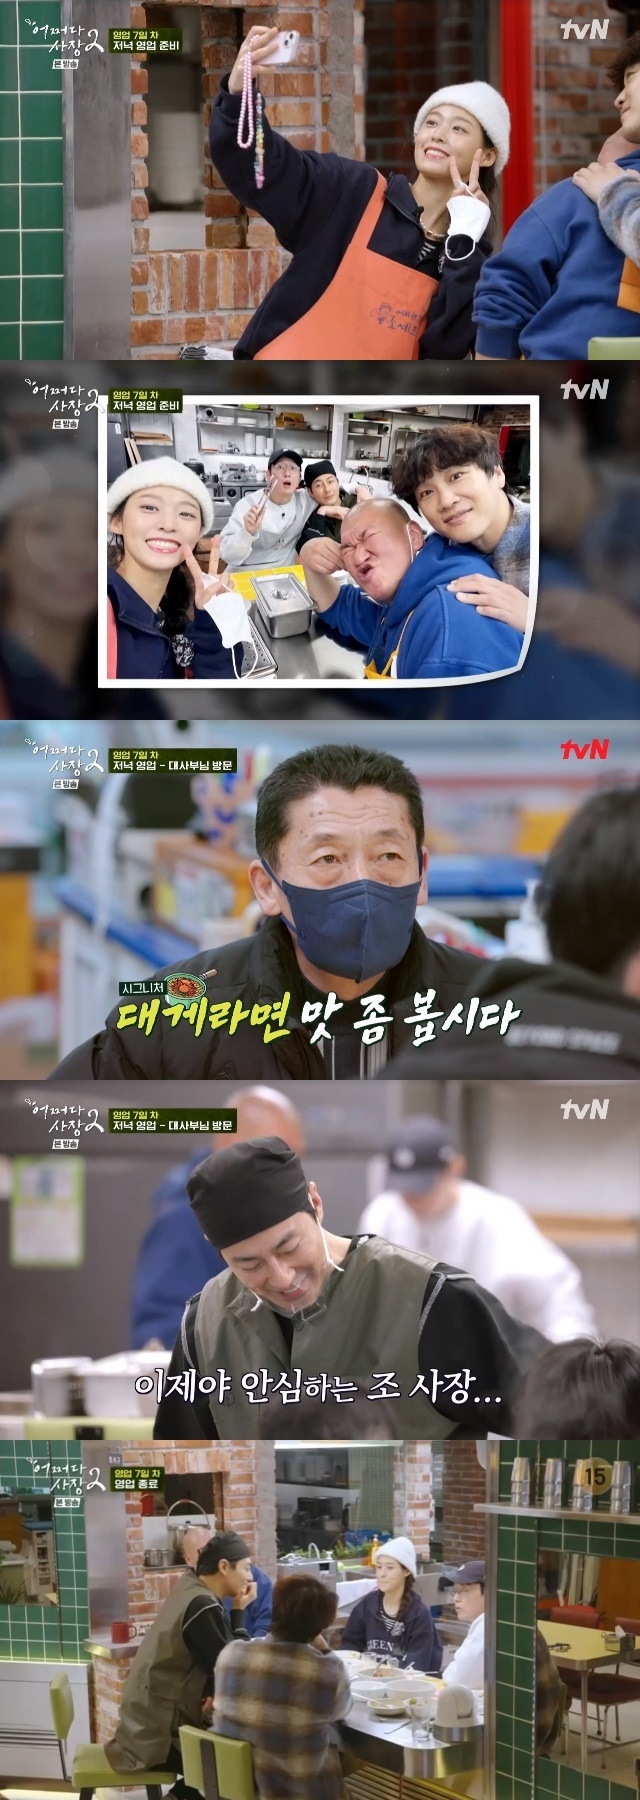 Kim Hye-soos Alba rush was heraldedIn the 10th episode of TVN entertainment How the President 2 broadcasted on April 28, Park Hyo-joon, Seolhyun and Park Byung-eun joined the part time job on the 7th day of sales.On this day, the boss, who had a lot of time to build up the Mart experience, started to chat with the Piper in earnest, and the face he knew was coming out.Cha Tae-hyeun followed a follow-up as one The Piper entered Mart and informed him his father was eating at a restaurant.I have memorized the family relationship of Mart regular The Piper.The 14-year-old Jae-ryul, who had left a video letter to his girlfriend who had just left the business on the second day of the business, showed his fanship about Seolhyun this time.Jae-ryul intuitively picked out the rice cake soup menu without worrying that Seolhyun would boil the rice cake soup at lunch Vic-Fezensac, and Seolhyun working in the kitchen.Then, in front of Seolhyun, he ate spicy kimchi bibimbap and laughed at it.Cha Tae-hyeun met Junyoungs sister while interfering with the coin karaoke room The Piper outside Mart.In the case of this house, the name of the child was made up of the sisters gold, silver, mystery, rain, and the last youngest son, Junyoung. Cha Tae-hyeun was amazed at the names of his siblings.Then, he joined the youngest Junyoung, who came across by chance, and talked about the love of the students.Park Byeong-eun, who was a talk hunter who went to see meddling here and there, learned Savoie for a while and then played in the butcher corner.Park Byeong-eun, who did not know how to get the first sixty-five, cut it with a chopstick, but his ability was fast.In the evening Vic-Fezensac, Yunkyoung The Bounty mother decided to sell the meat-making rice and roasted meat using the seasoned meat.Jo In-sung added a combination of spinach miso soup here, and the taste of it is naturally passed.Jo In-sung showed that Park Byeong-eun and Park Hyo-joon helped him to handle the five-year-olds at a time, and showed a general chef-like aspect.The Piper told Jo In-sung, who asked about the taste of food, Cho is so funny.In the evening, the president of the Chinese house, who was all against Vic-Fezensac Cha Tae-hyeun, Jo In-sung, and Albaz, visited and focused attention.So they praised Bibim Champon for being so delicious, and the boss responded with a joke, Do I boil?The chef Jo In-sung, who faced the master, boiled four of them in tension.The Chinese boss later confirmed, Is this Jo In-sung boiling? and praised it as delicious. Jo In-sung smiled with relief.Jo In-sung talked to the boss about cooking life.The boss, who started cooking at the age of 16, said that his hands and oils boasted of his face, and unlike before, his physical strength does not follow him now.He showed his belief in his wife, who was a companion, saying that it was difficult to get Vic-Fezensac without a wife or himself.The boss left the store with a greeting saying Streat.It was not until the four-member Eckelbie The Piper that the busy 7th day of business ended.The dinner menu of the day consisted of a chan-dong-tang and a kimchi steamed by a different shop boss.Jo In-sung, who is against the taste, admired there are too many corianders in the world, and Seolhyun also ate Savoie deliciously, saying I like Feelings.The meats given by Yunkyoung The Bounty mother also caught the appetite.They filled the boat with the food presented by the residents and talked about the residents.On the other hand, in the trailer released at the end of the day, two nervous bosses were drawn before leaving the part time job on the 8th of the business.Cha Tae-hyeun, who adored the apron, said, Todays Part time job is Feelings, where the president comes to experience Alba.Later appearances were Kim Hye-soo and Park Kyung-hye; Cha Tae-hyen greeted Albanim Kim Hye-soo at 90 degrees.